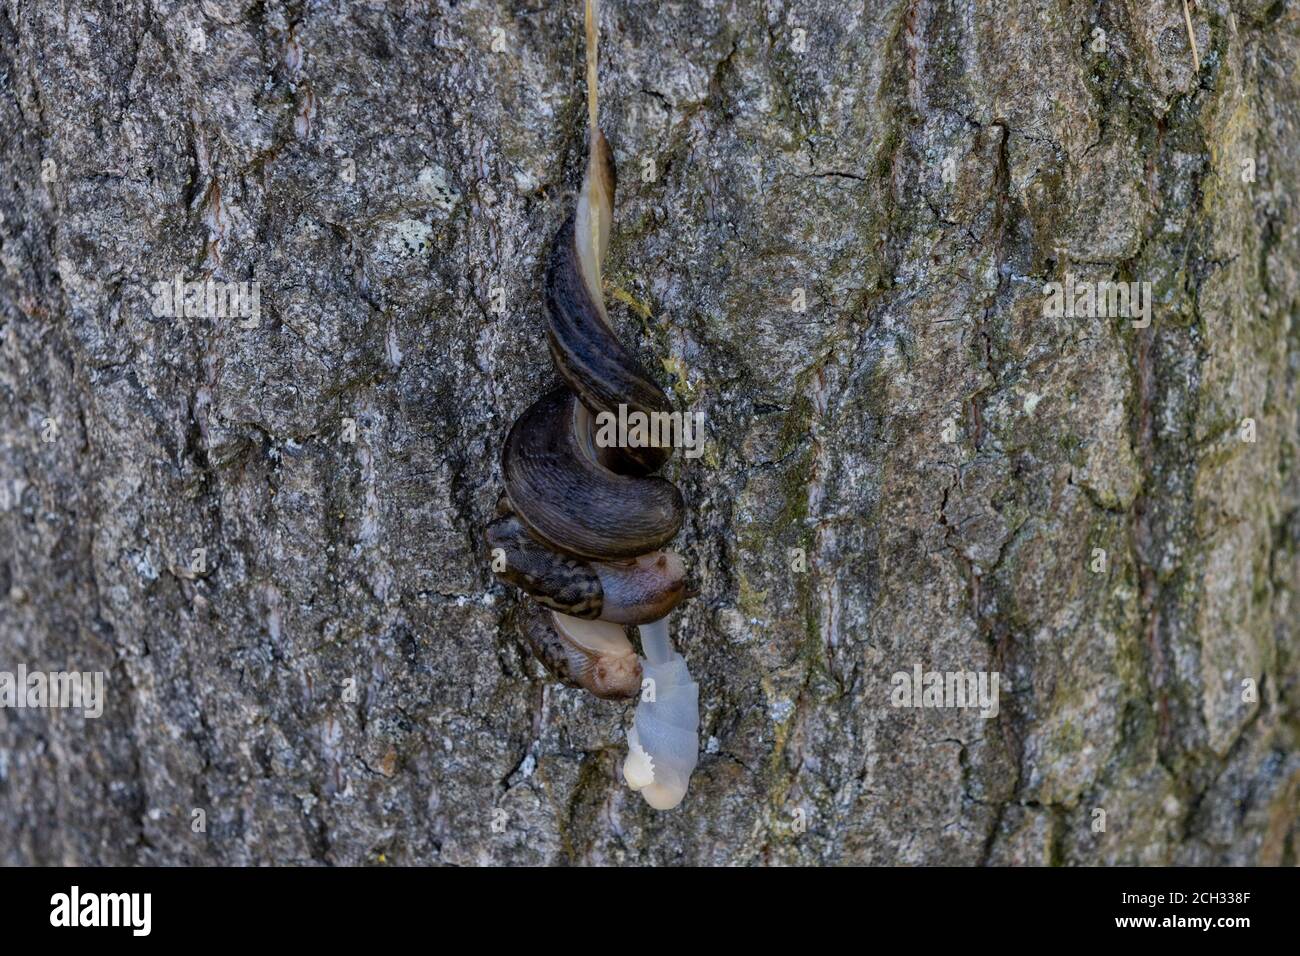 Mating great grey slugs hanging down from tree Stock Photo